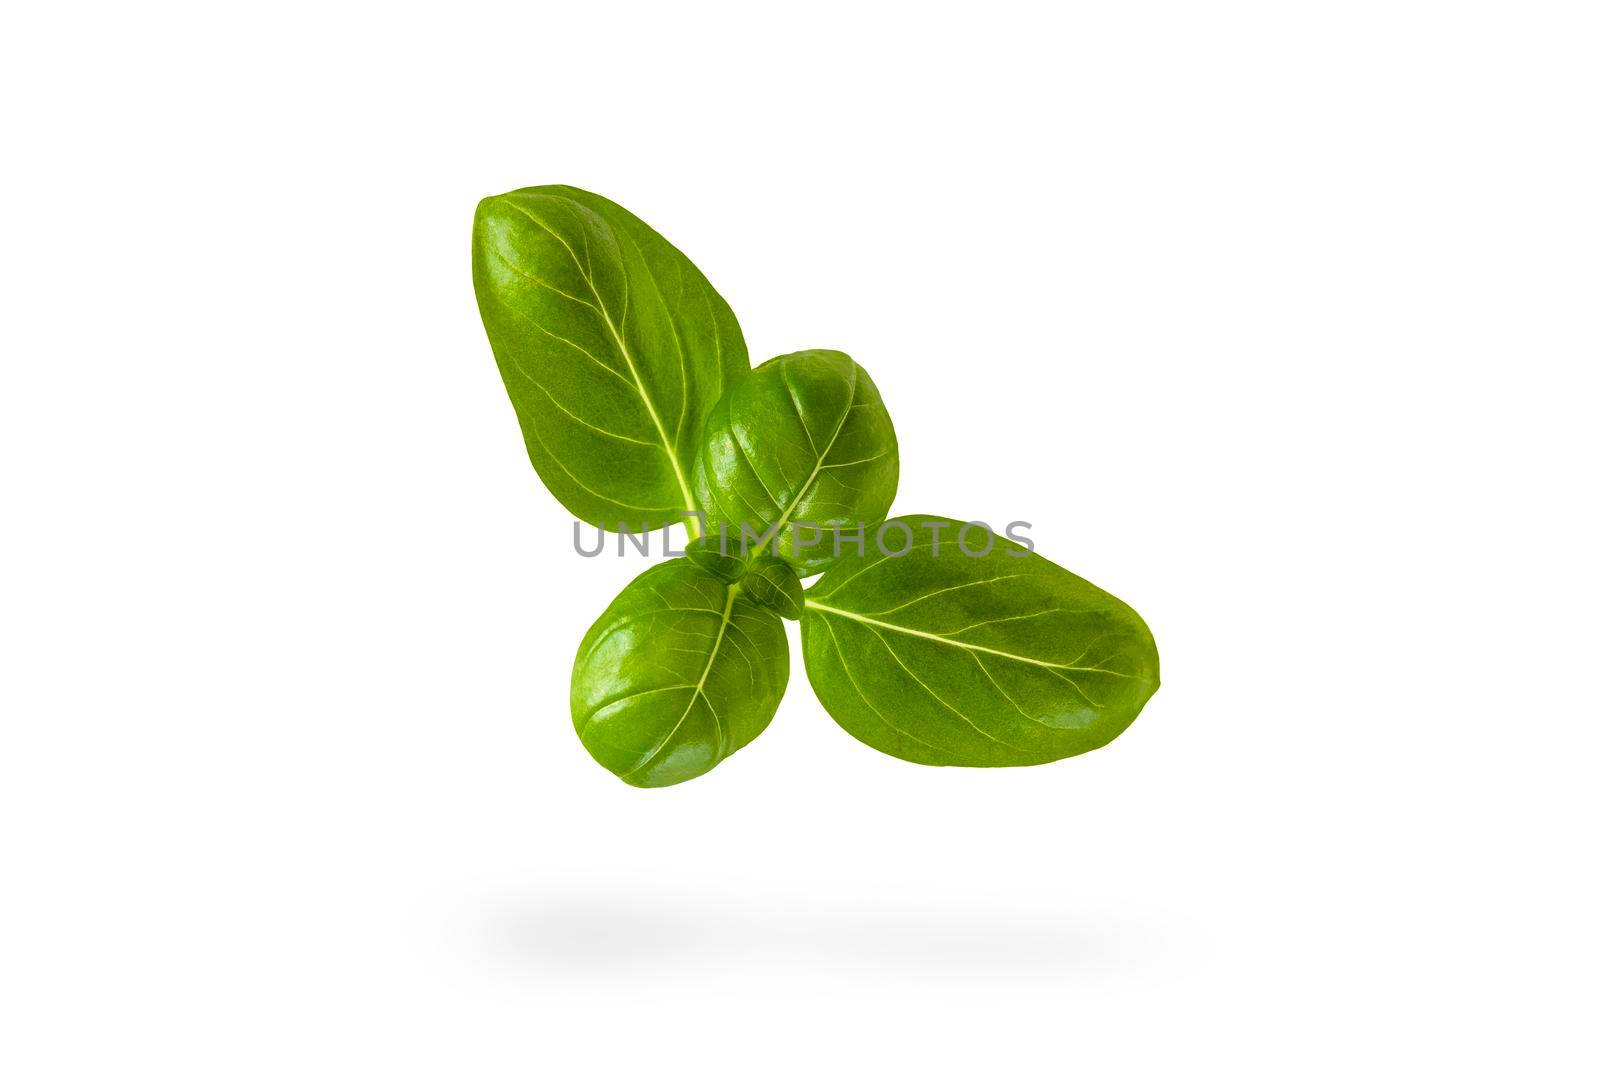 Fresh basil leaves on a white isolated background. A green basil leaf with water drops falls casting a shadow. Blank isolate for inserting a draft or label.